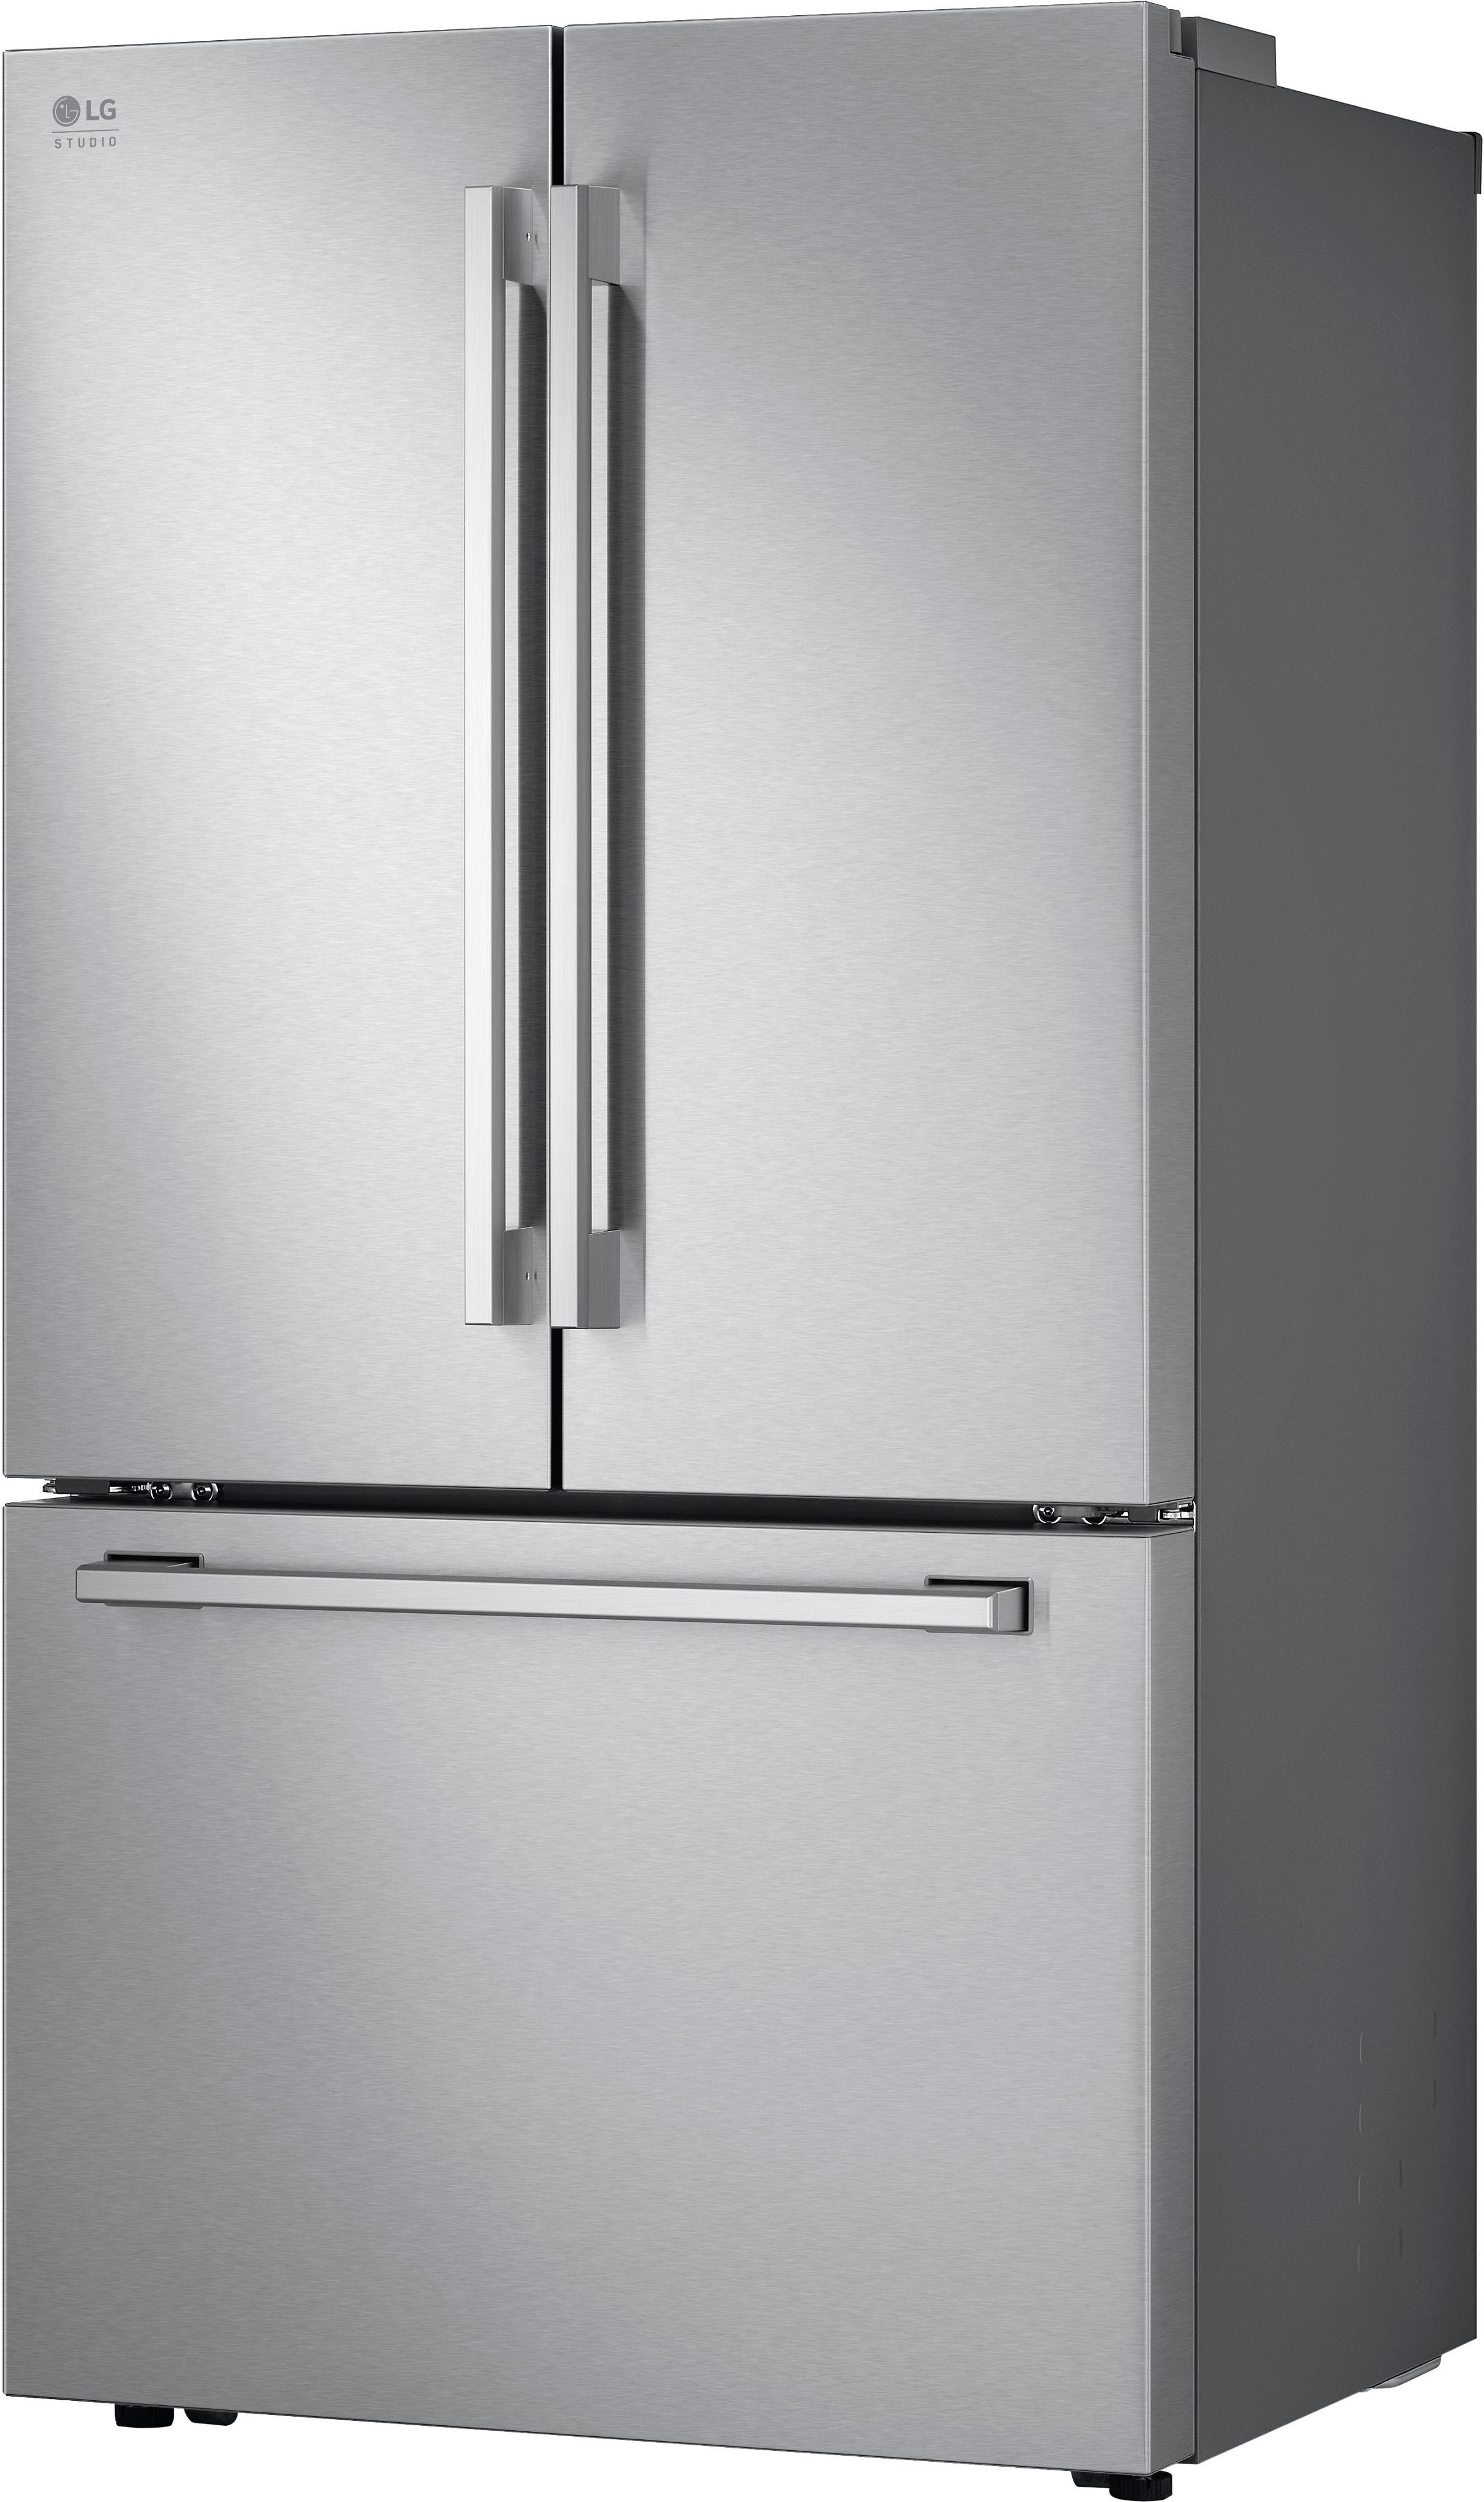 LG SRFB27S3 36 Inch Counter-Depth Freestanding French Door Smart  Refrigerator with 26.5 Cu. Ft. Capacity, Door Cooling+, CoolGuard™, Glide  N' Serve™, PrintProof™, LED Lighting, ThinQ® Technology, Smart Diagnosis,  Internal Water Dispenser, and